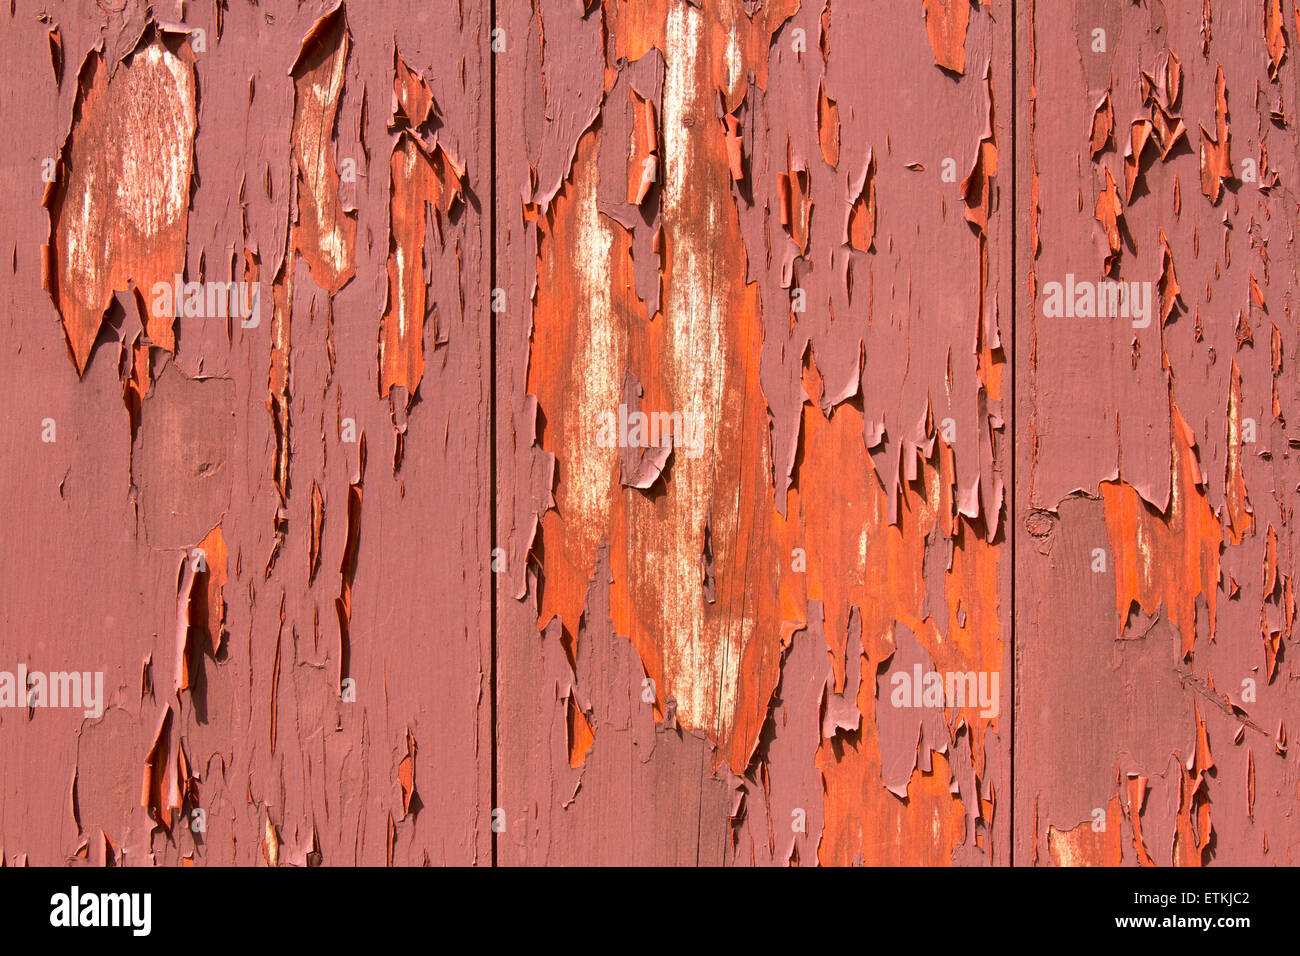 Red paint peeling off wooden panels. Stock Photo